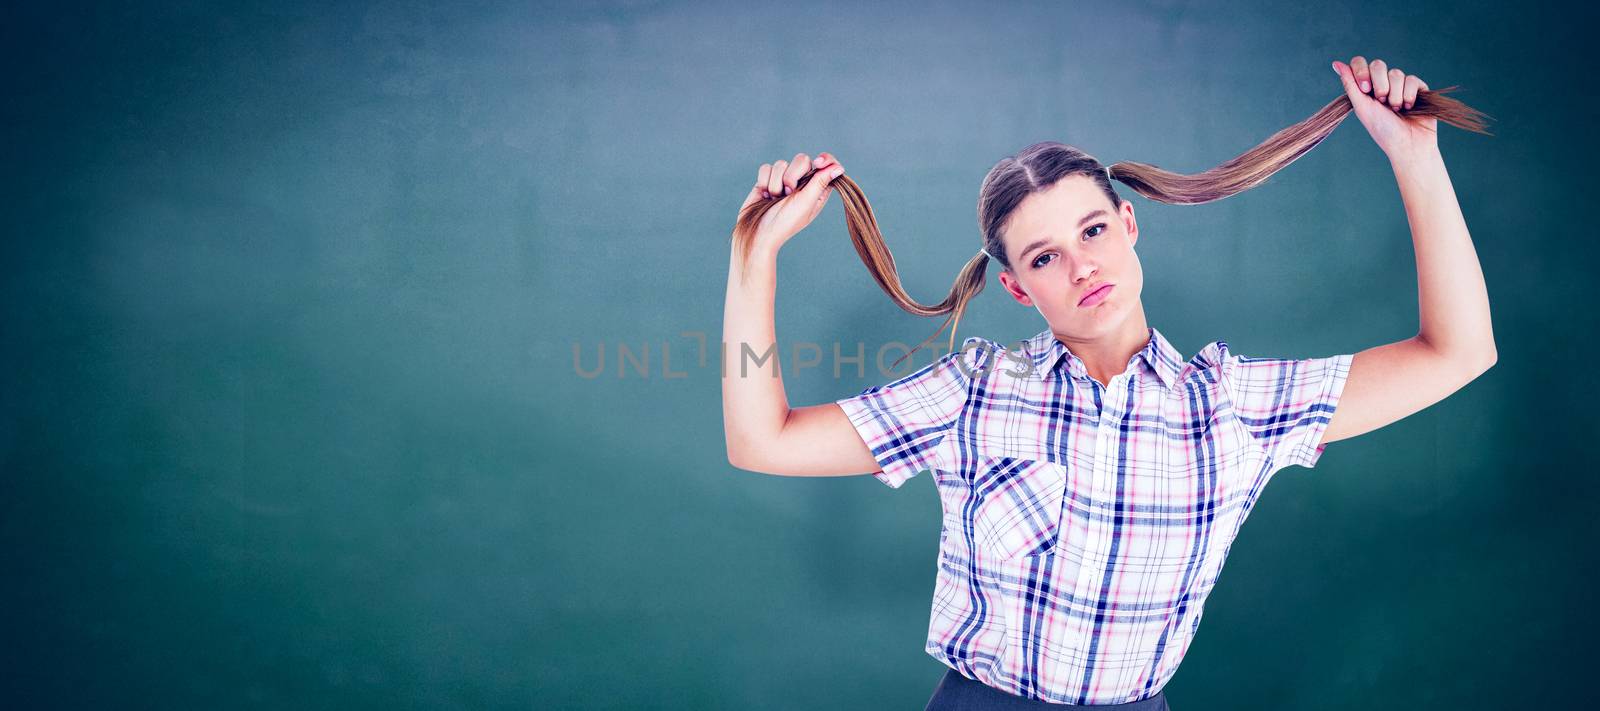 Geeky hipster holding her pigtails against green chalkboard